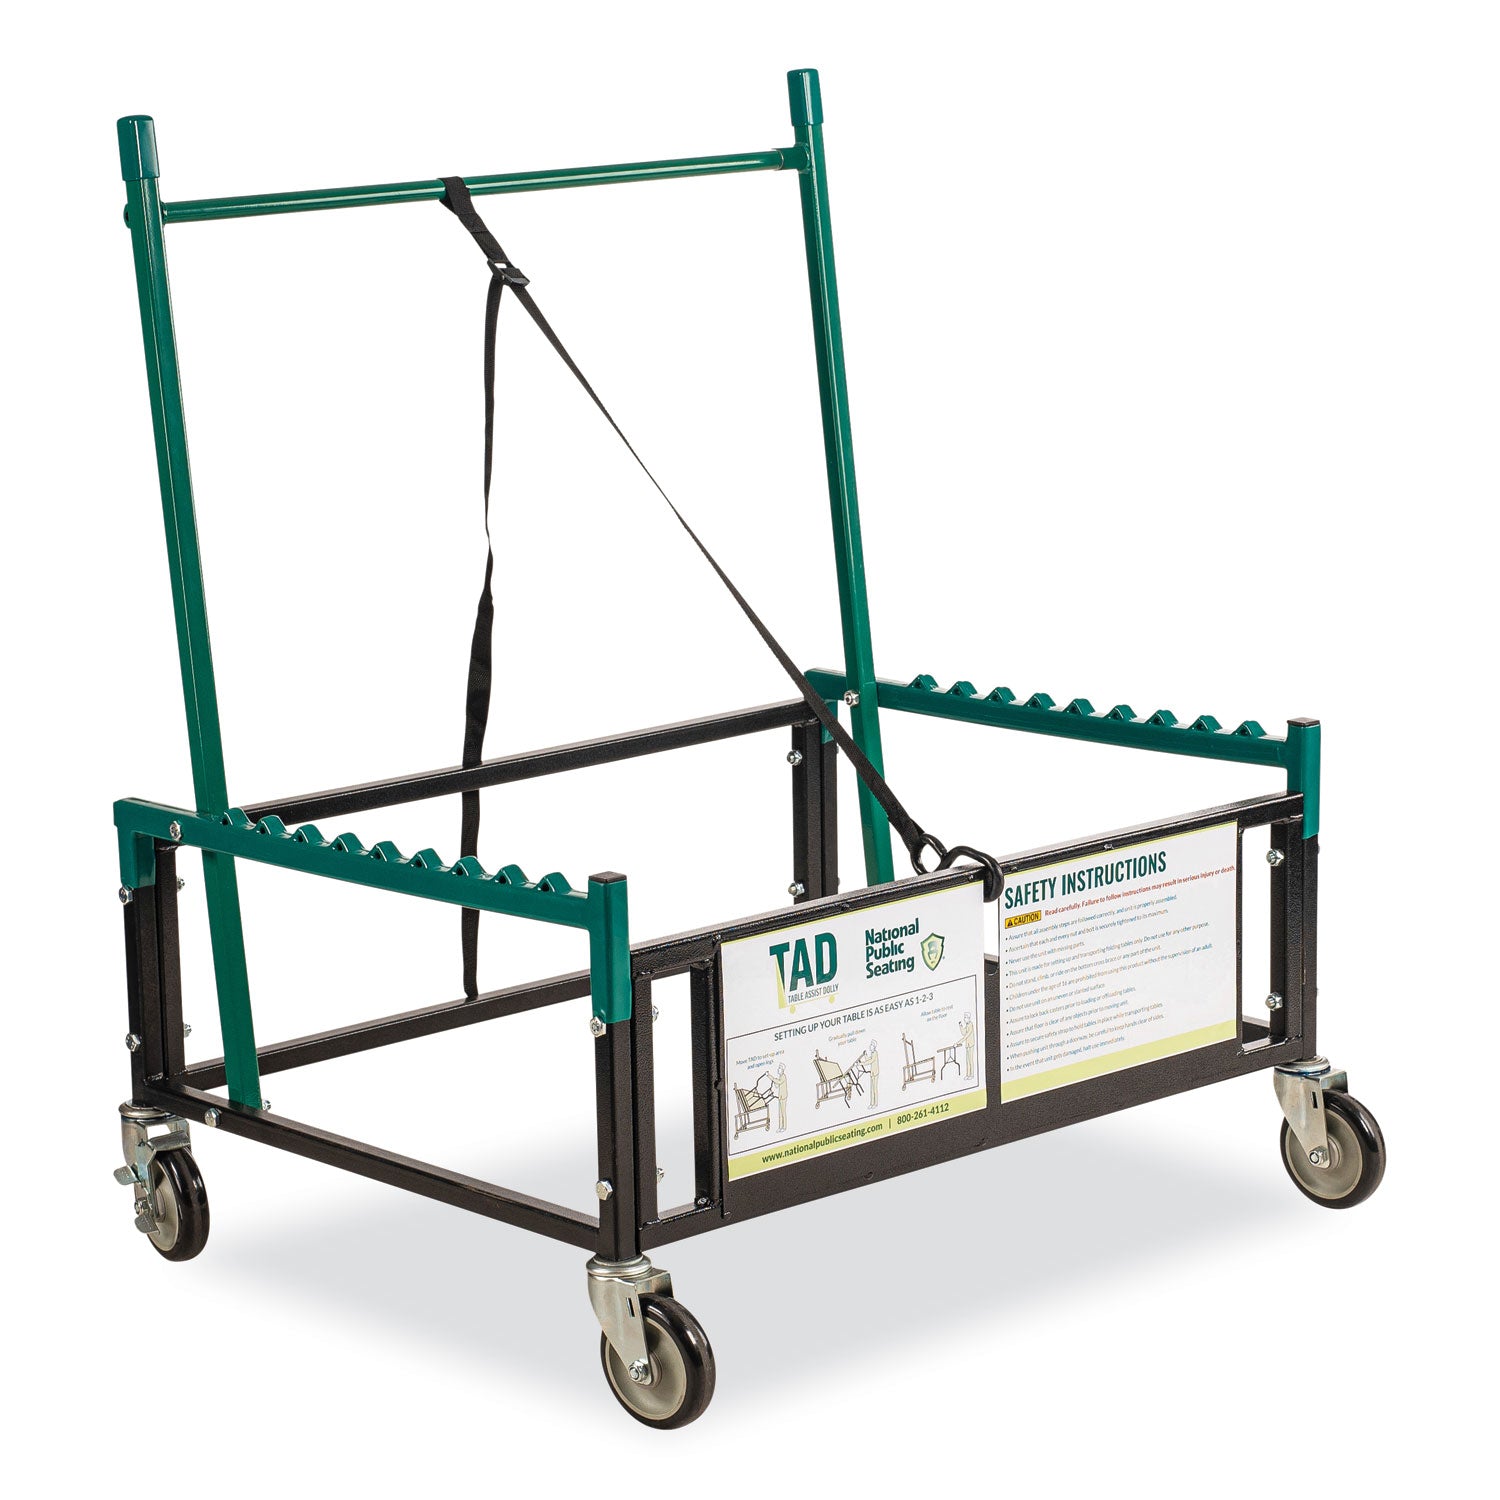 table-assist-dolly-1000-lb-capacity-38-x-30-x-445-black-green-ships-in-1-3-business-days_npstad - 1